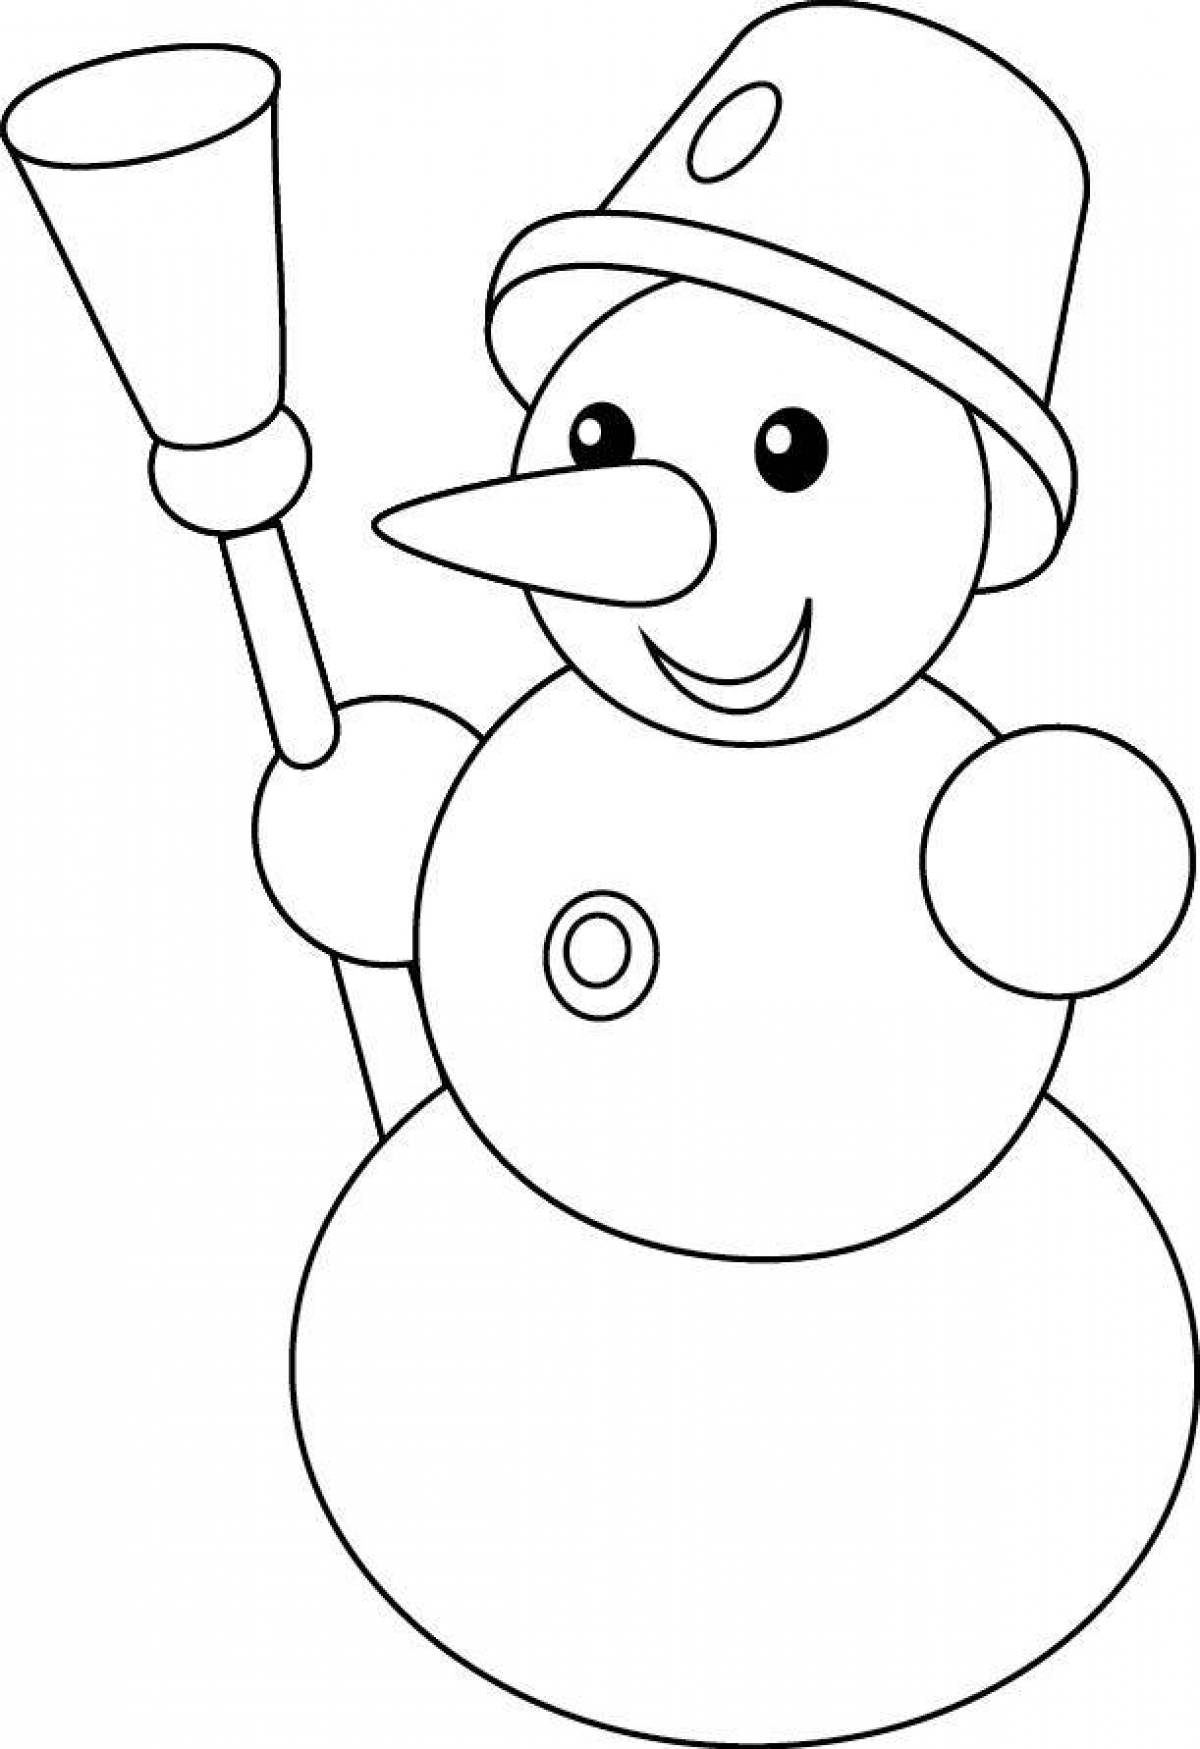 Bright snowman birthday coloring page